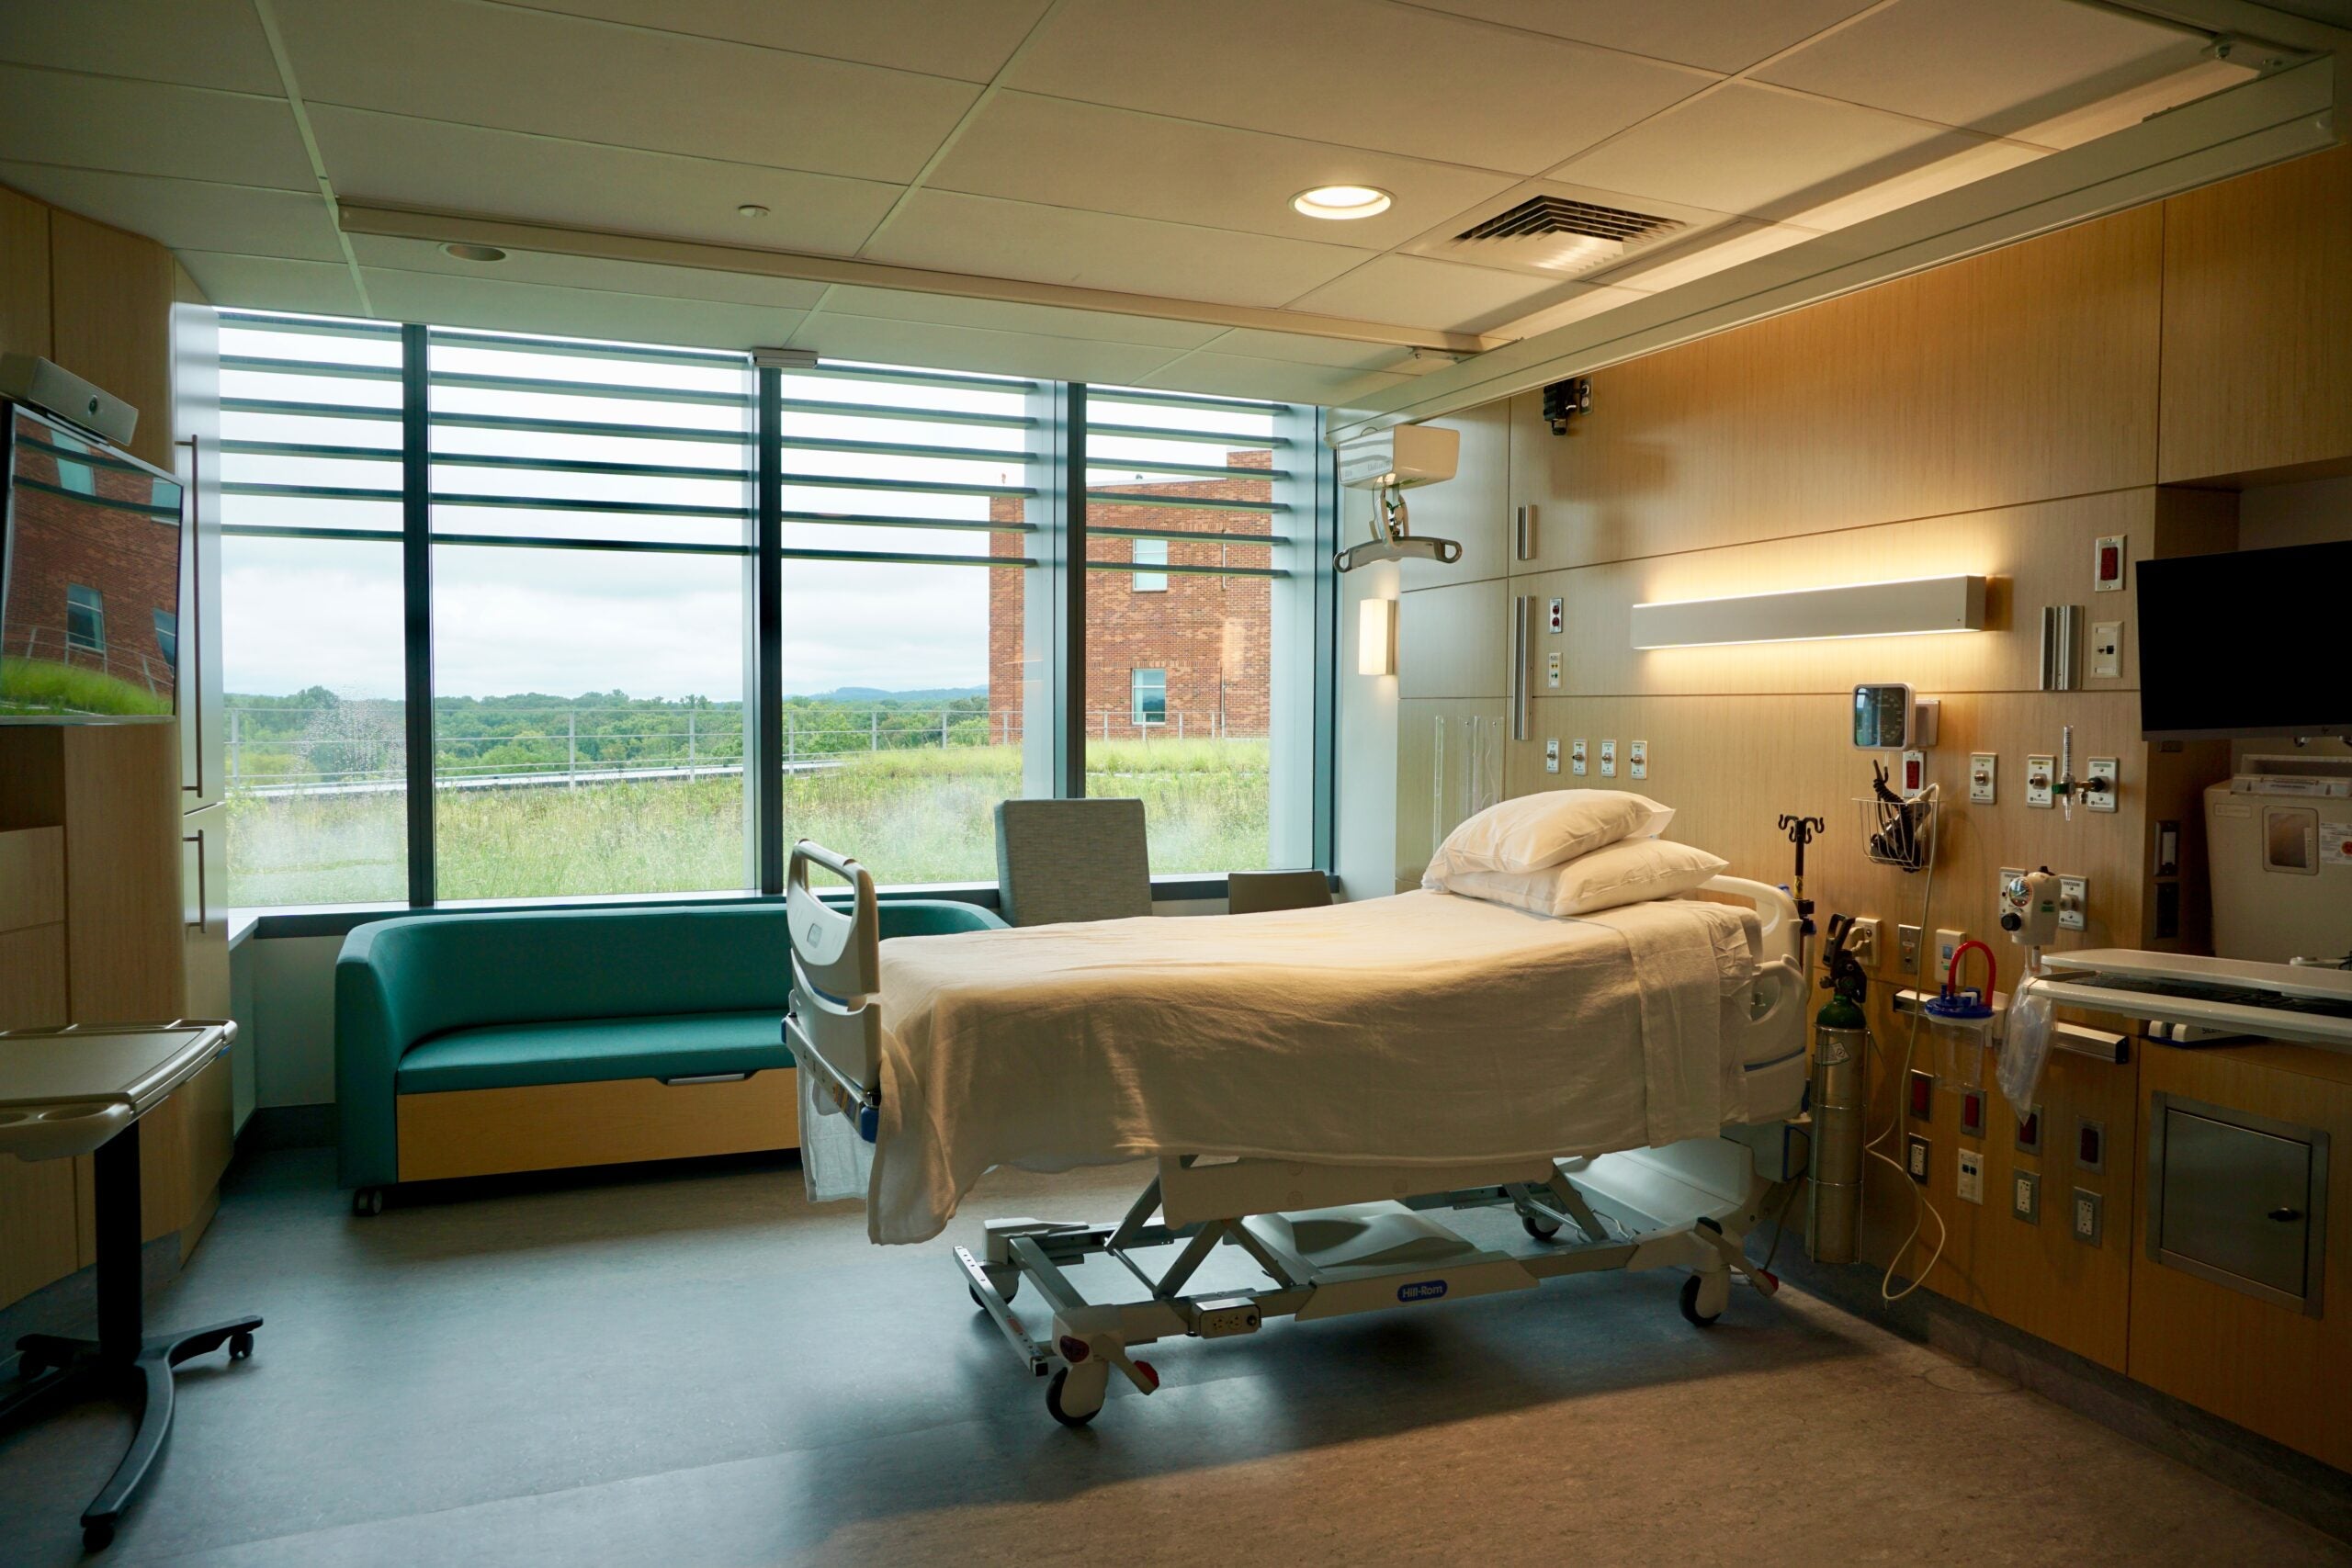 A picture of a nice hospital room